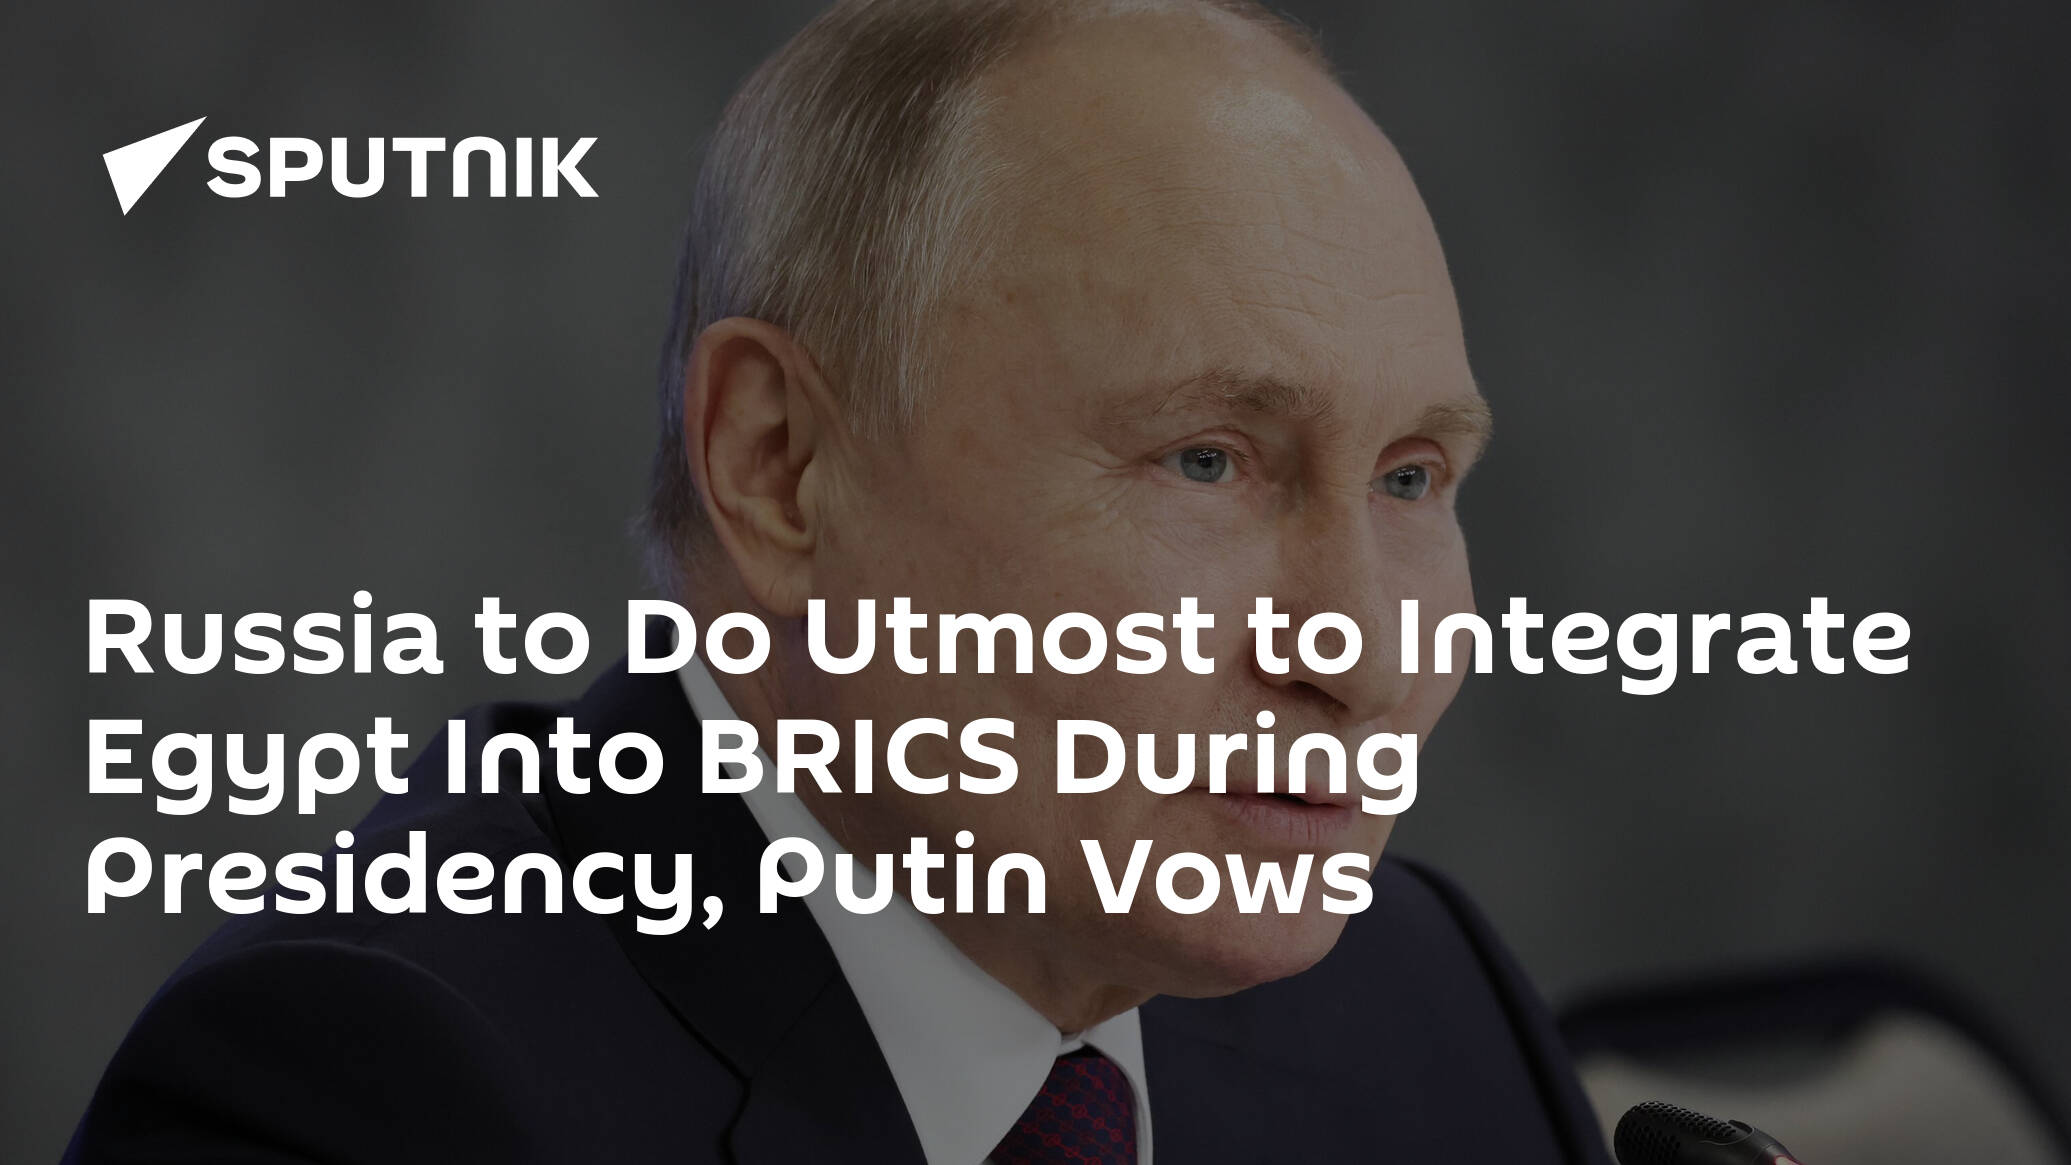 Russia to Do Utmost to Integrate Egypt Into BRICS During Presidency, Putin Vows